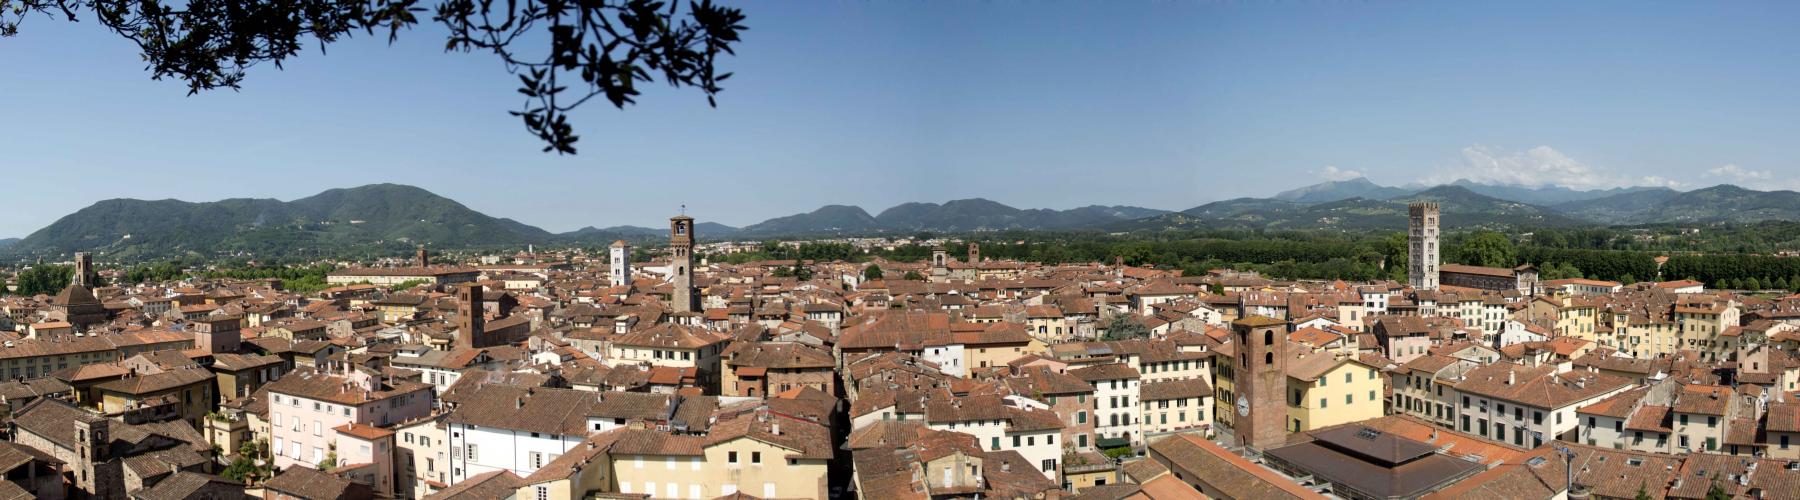 Lucca: panoramica ovest